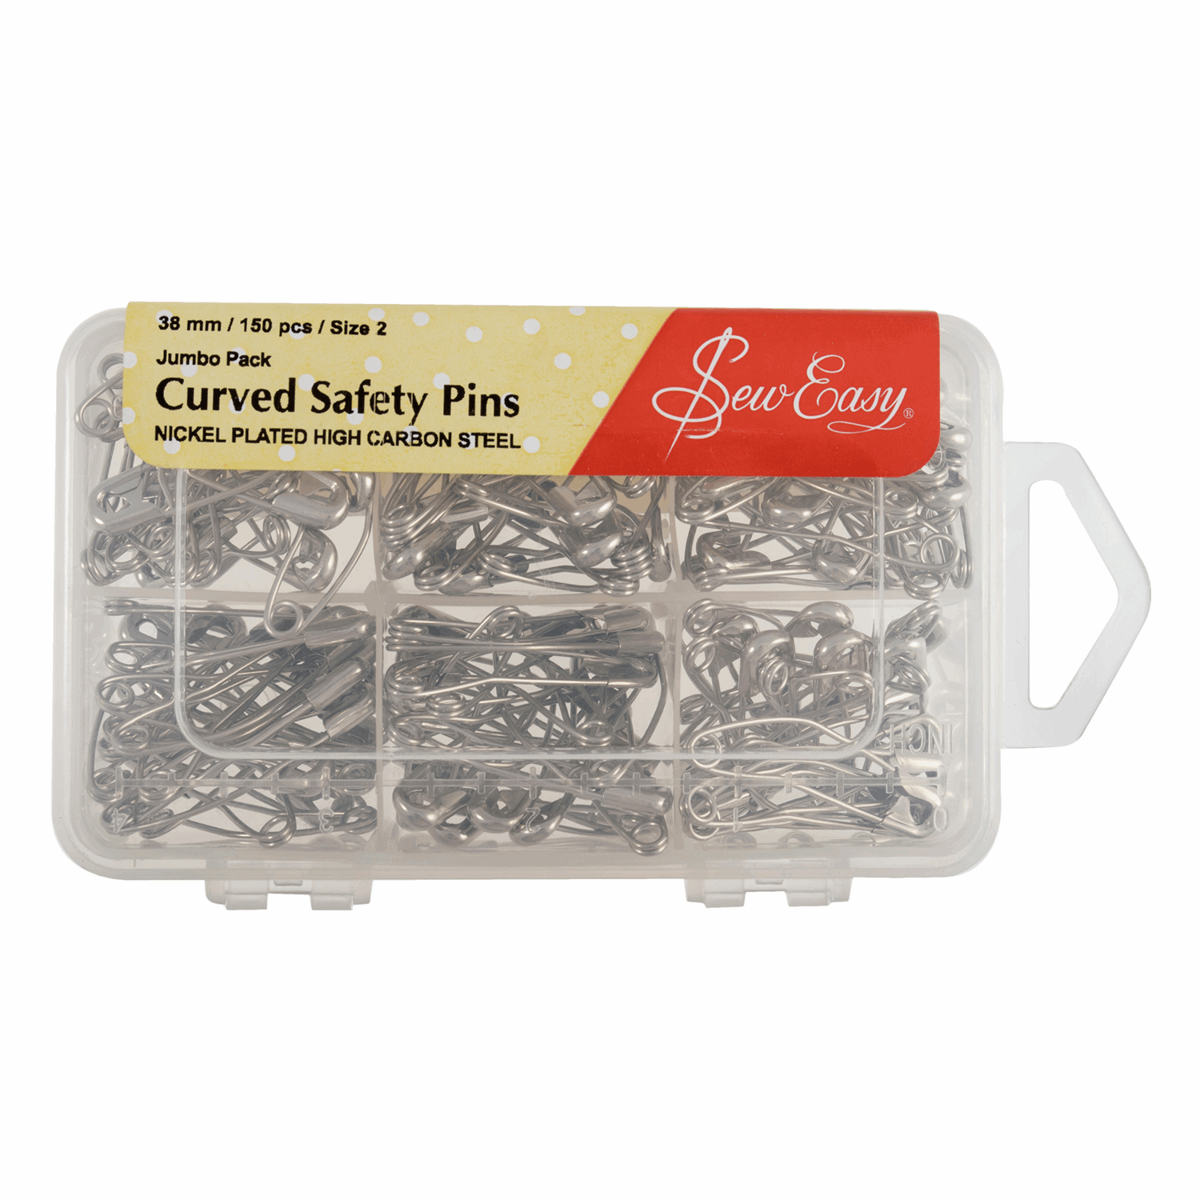 Sew Easy Curved Safety Pins - Box of 150